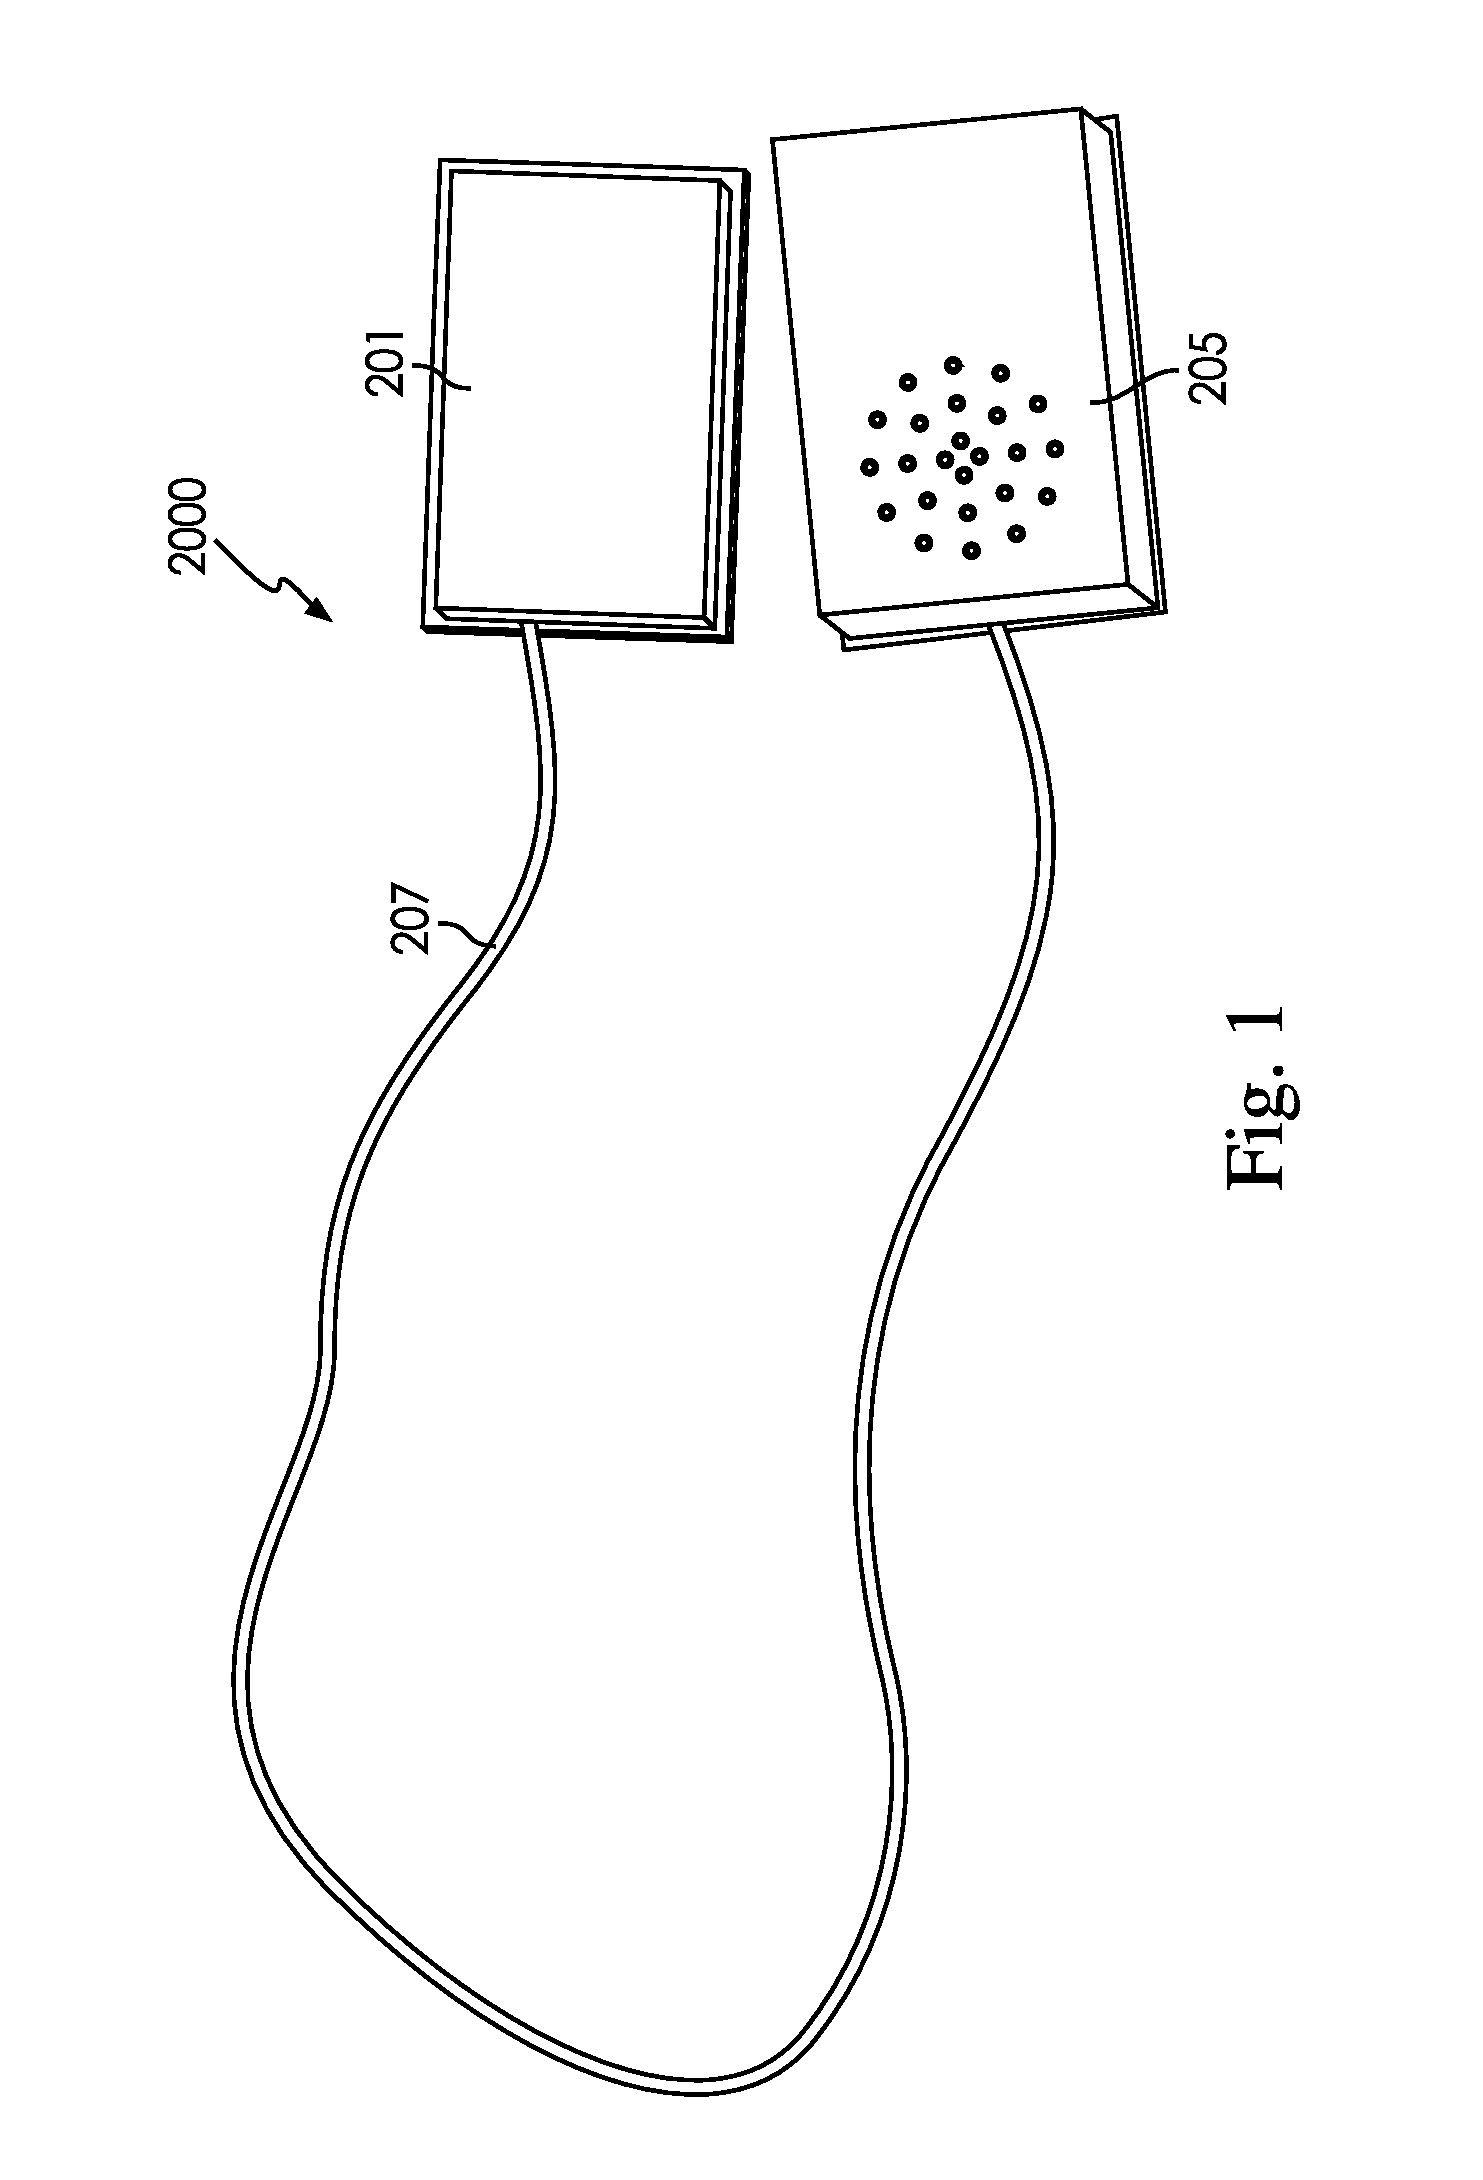 Systems and Methods for Indicating the Presence of a Child in a Vehicle